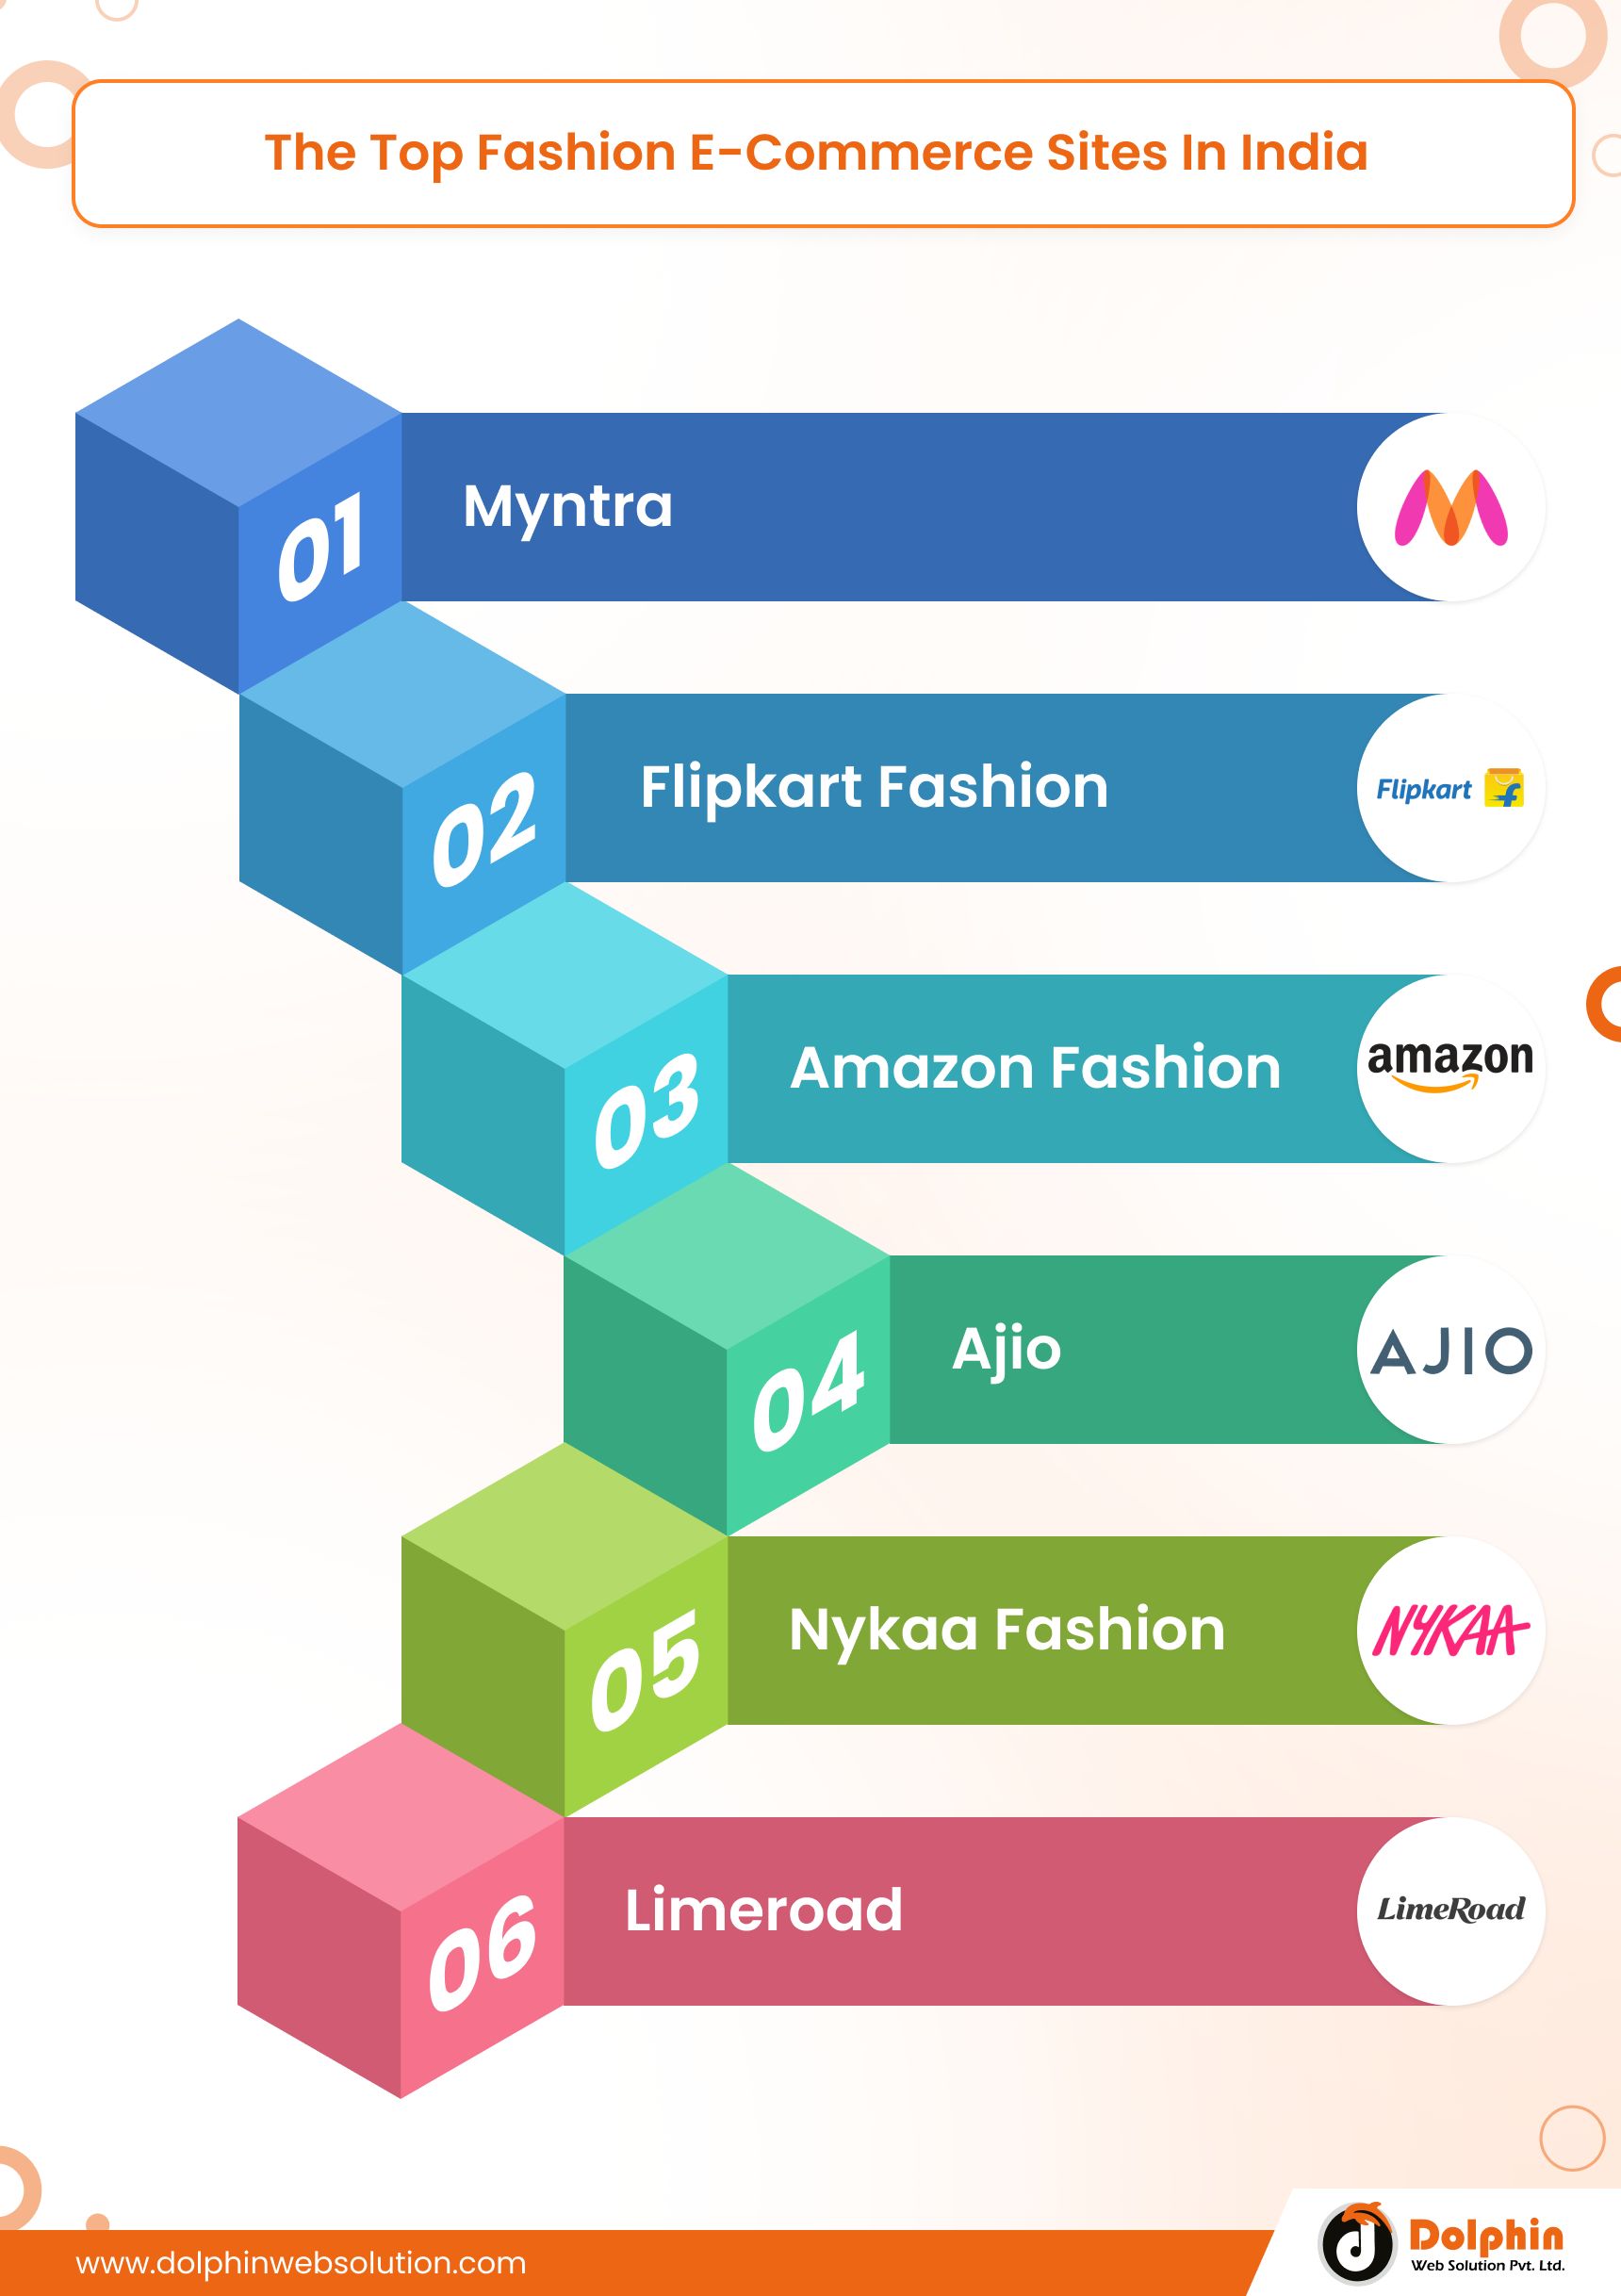 Top Fashion E-Commerce Sites In India